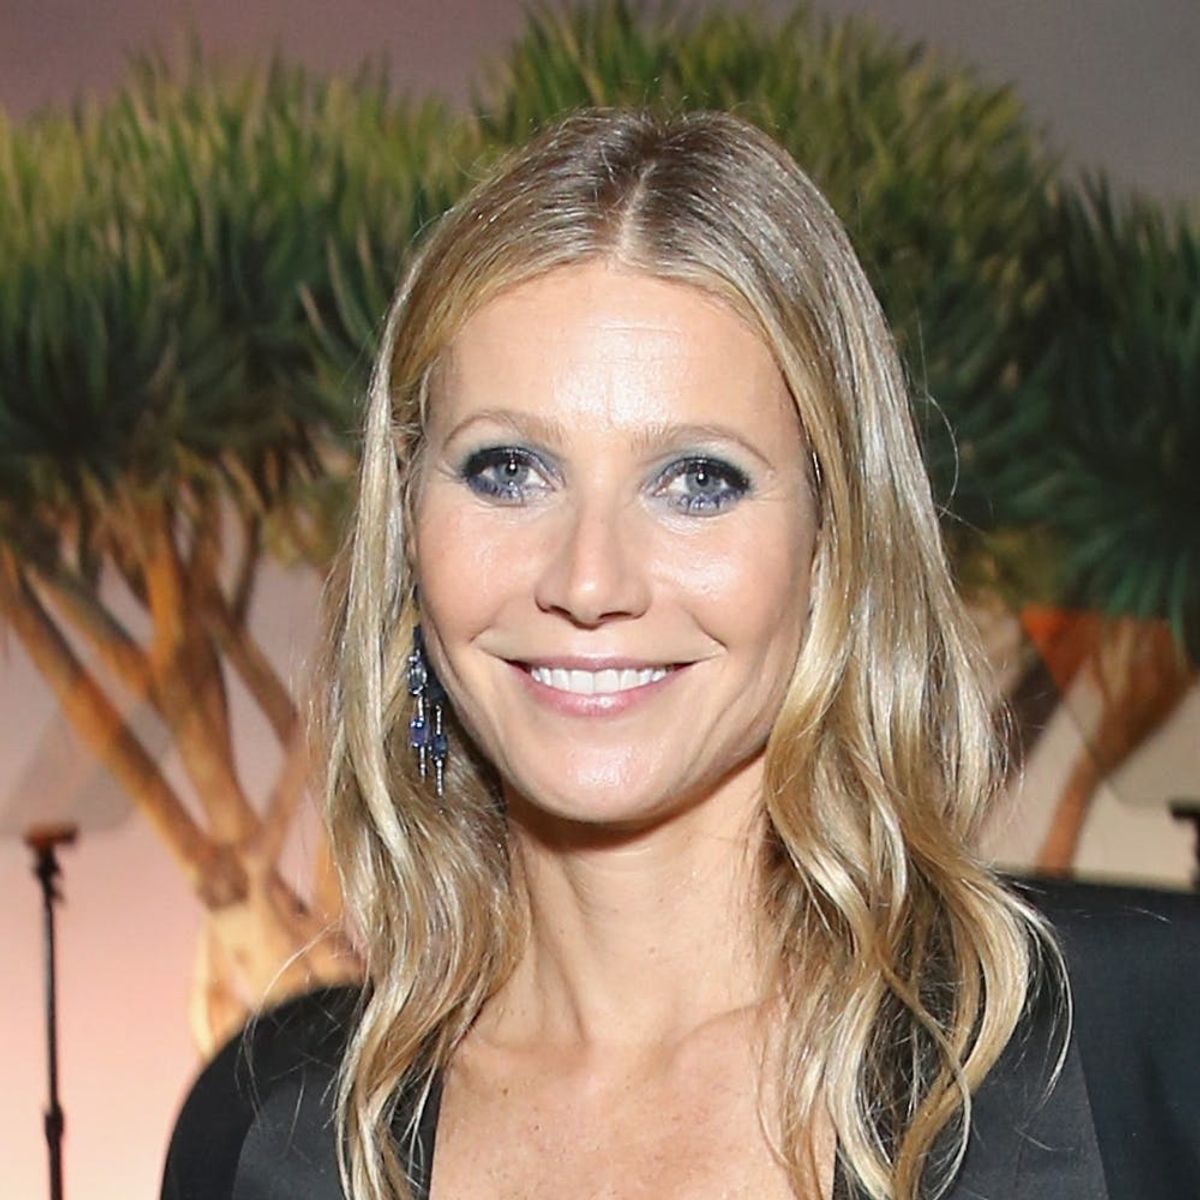 We Finally Know the Color of Gwyneth Paltrow’s Engagement Ring